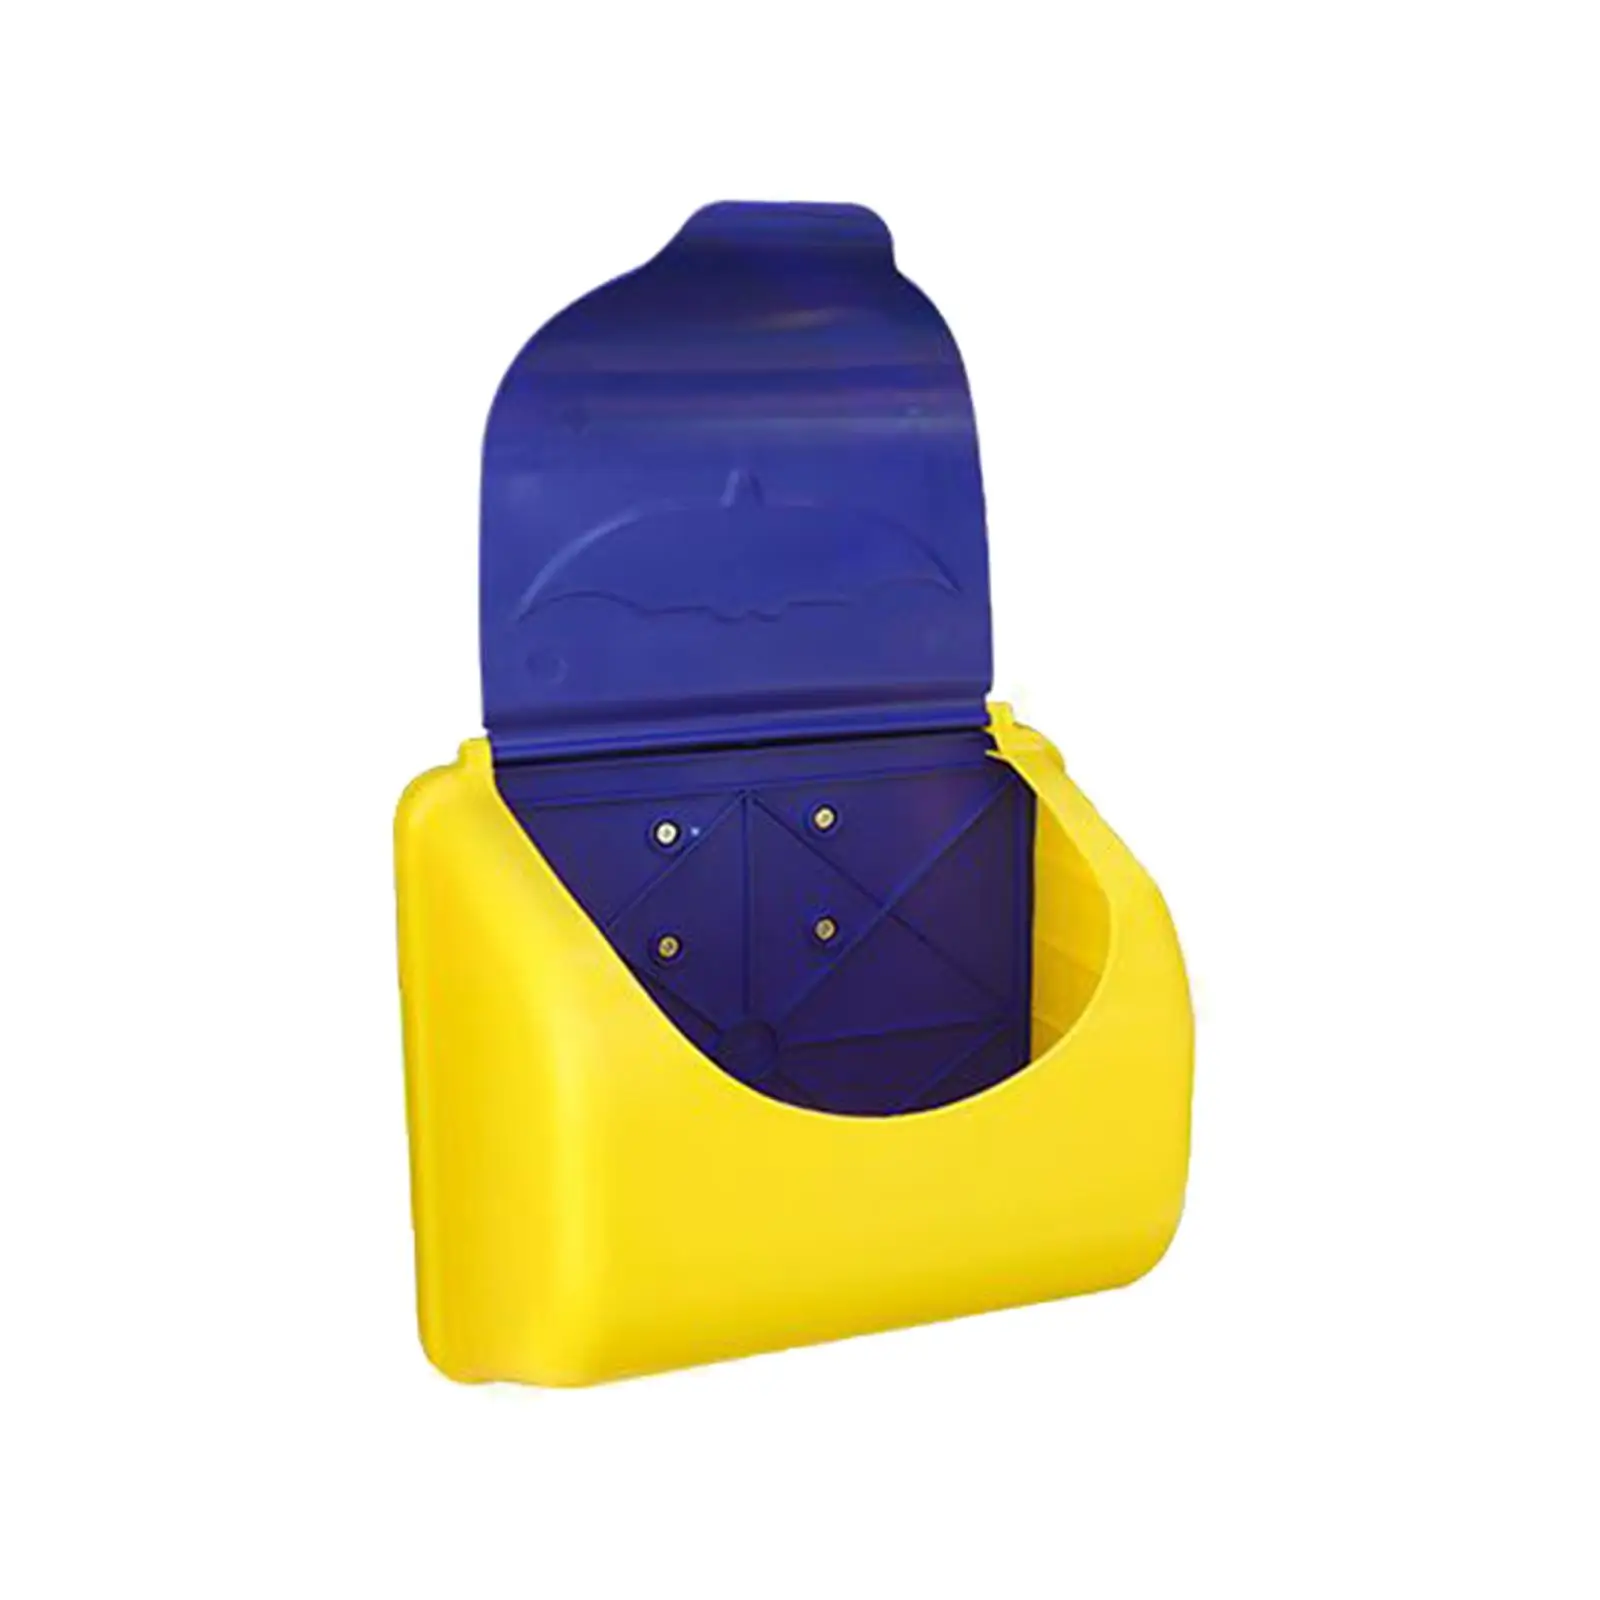 Simulation Mailbox Toy  Early Development Toy for Kids